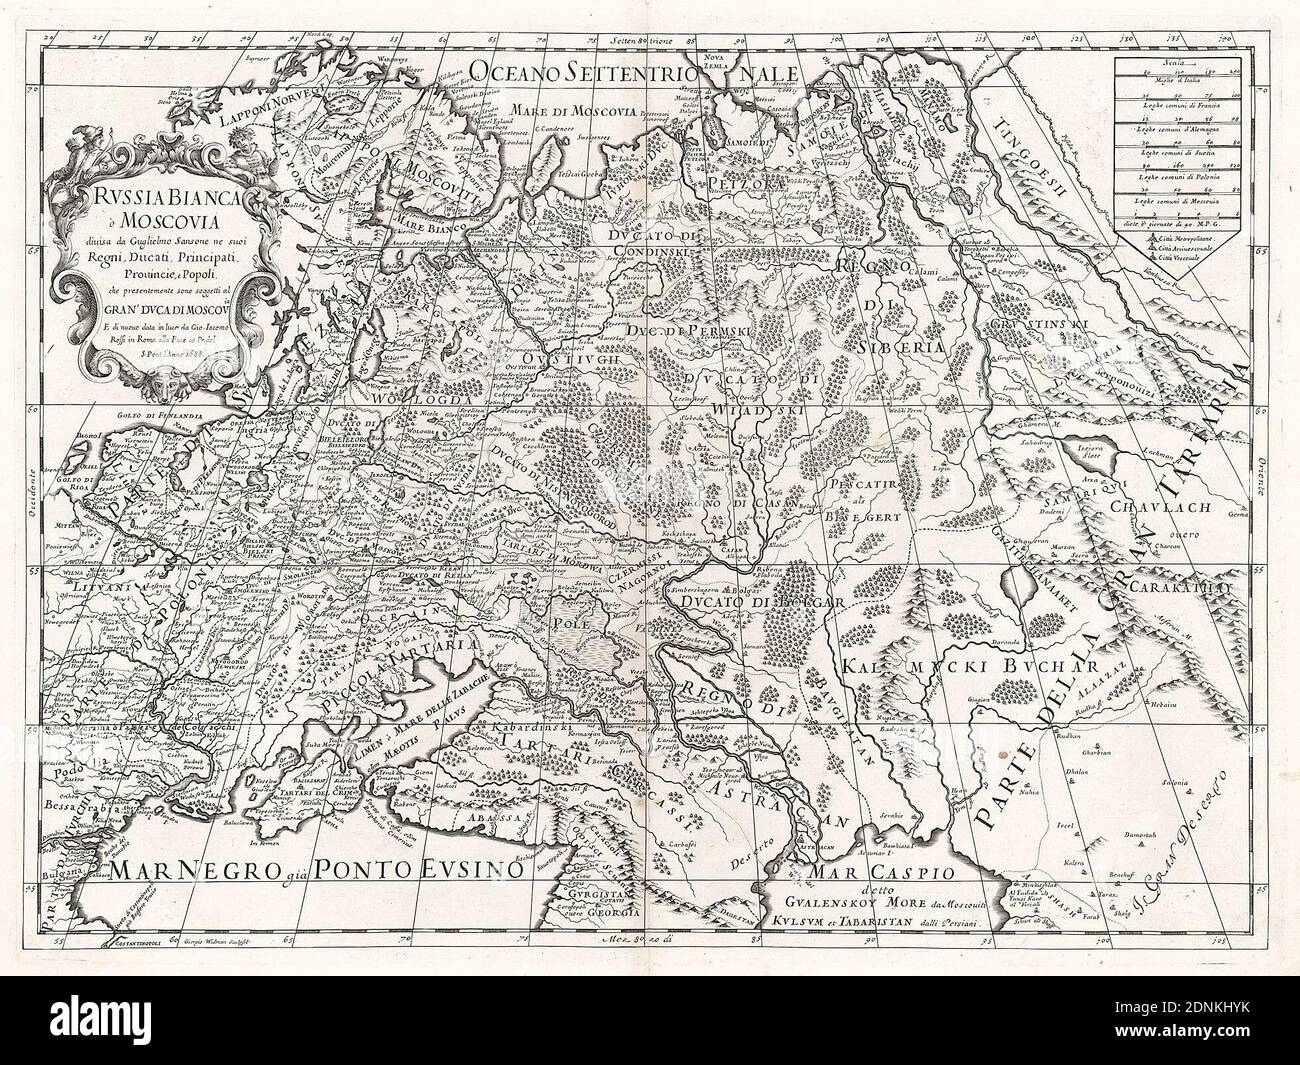 Map of Russia in the 17th century - 'Russia Bianca o Moscovia'. Map of the eastern part of Europe (Ukraine, Crimea, Caucasus, Russia, Lithuania, Poland). Map of 1688. Stock Photo